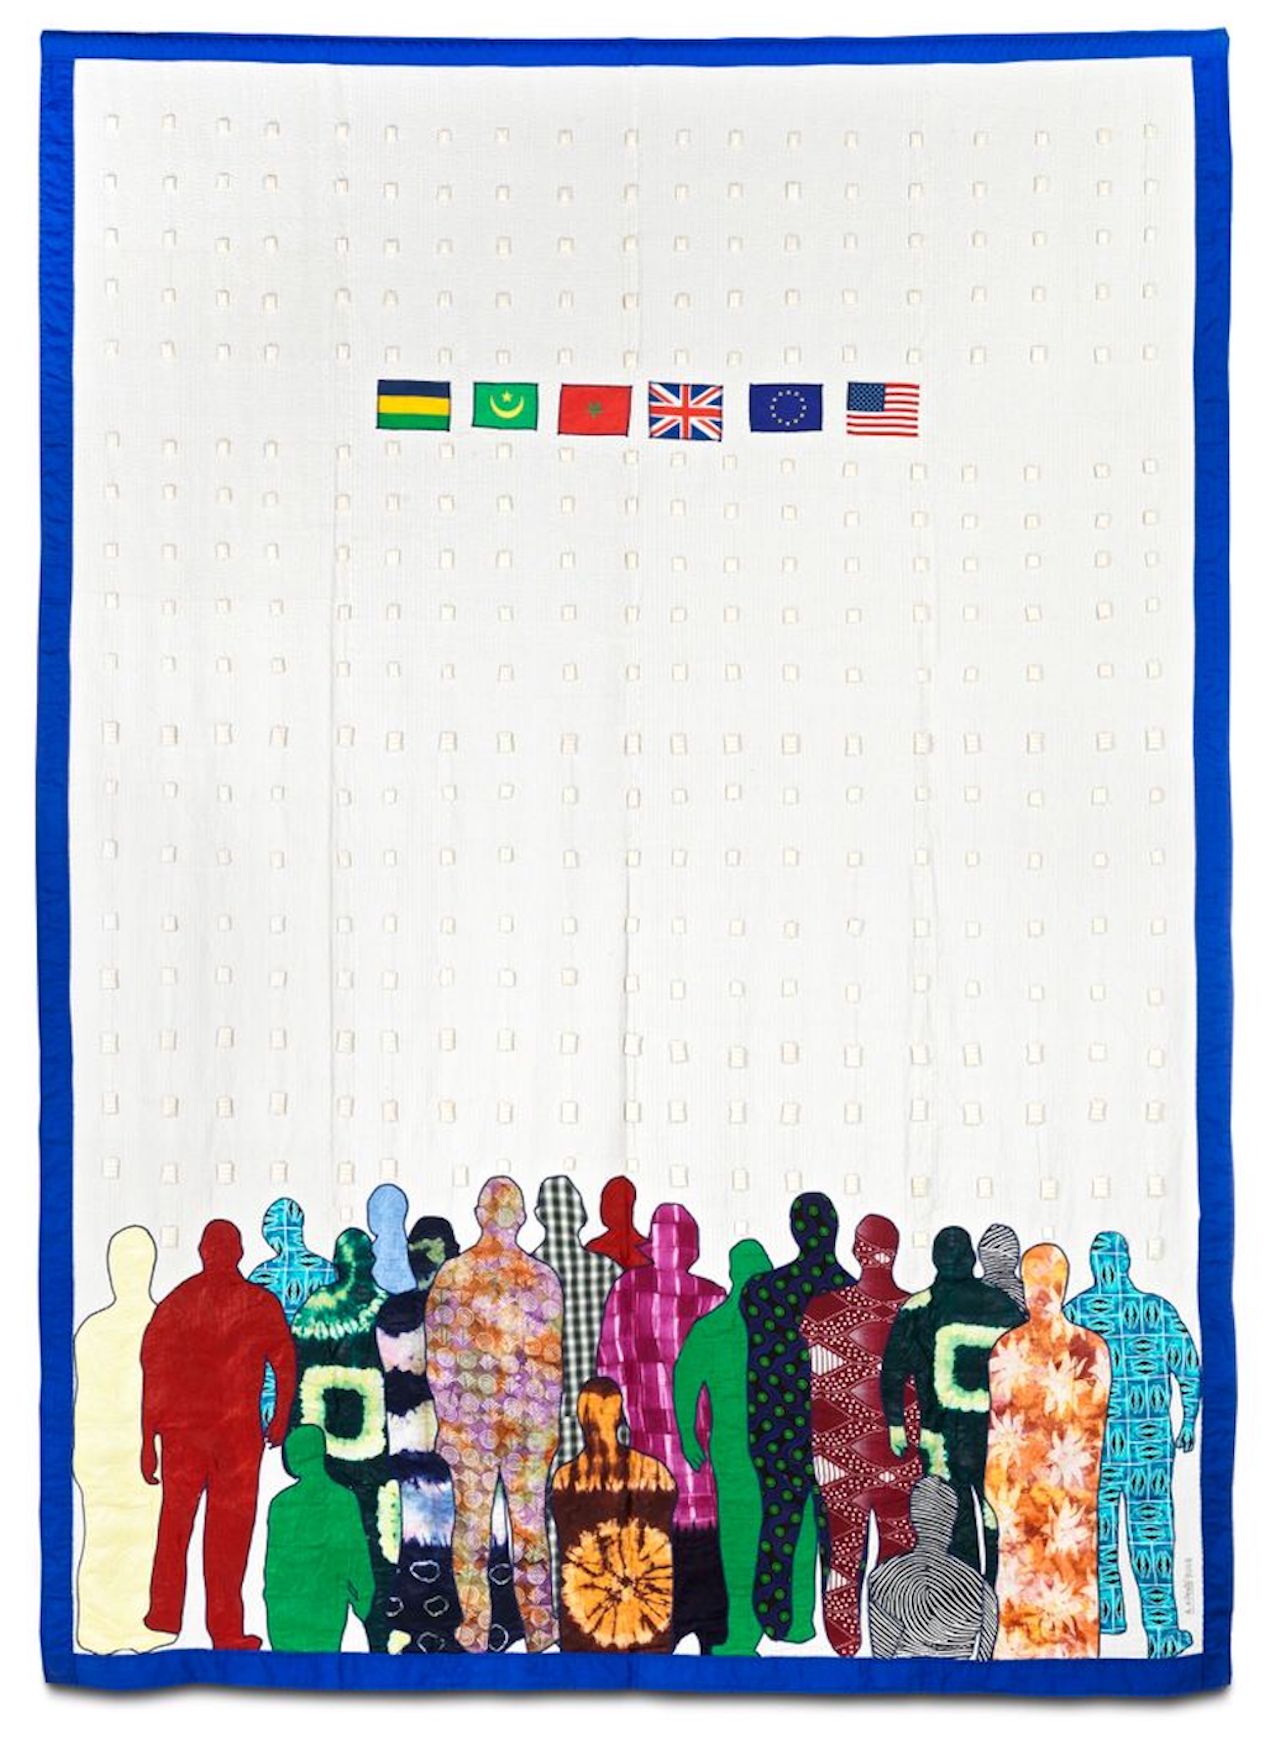 Abdoulaye Konaté, A Great Contemporary African Artist of his Time